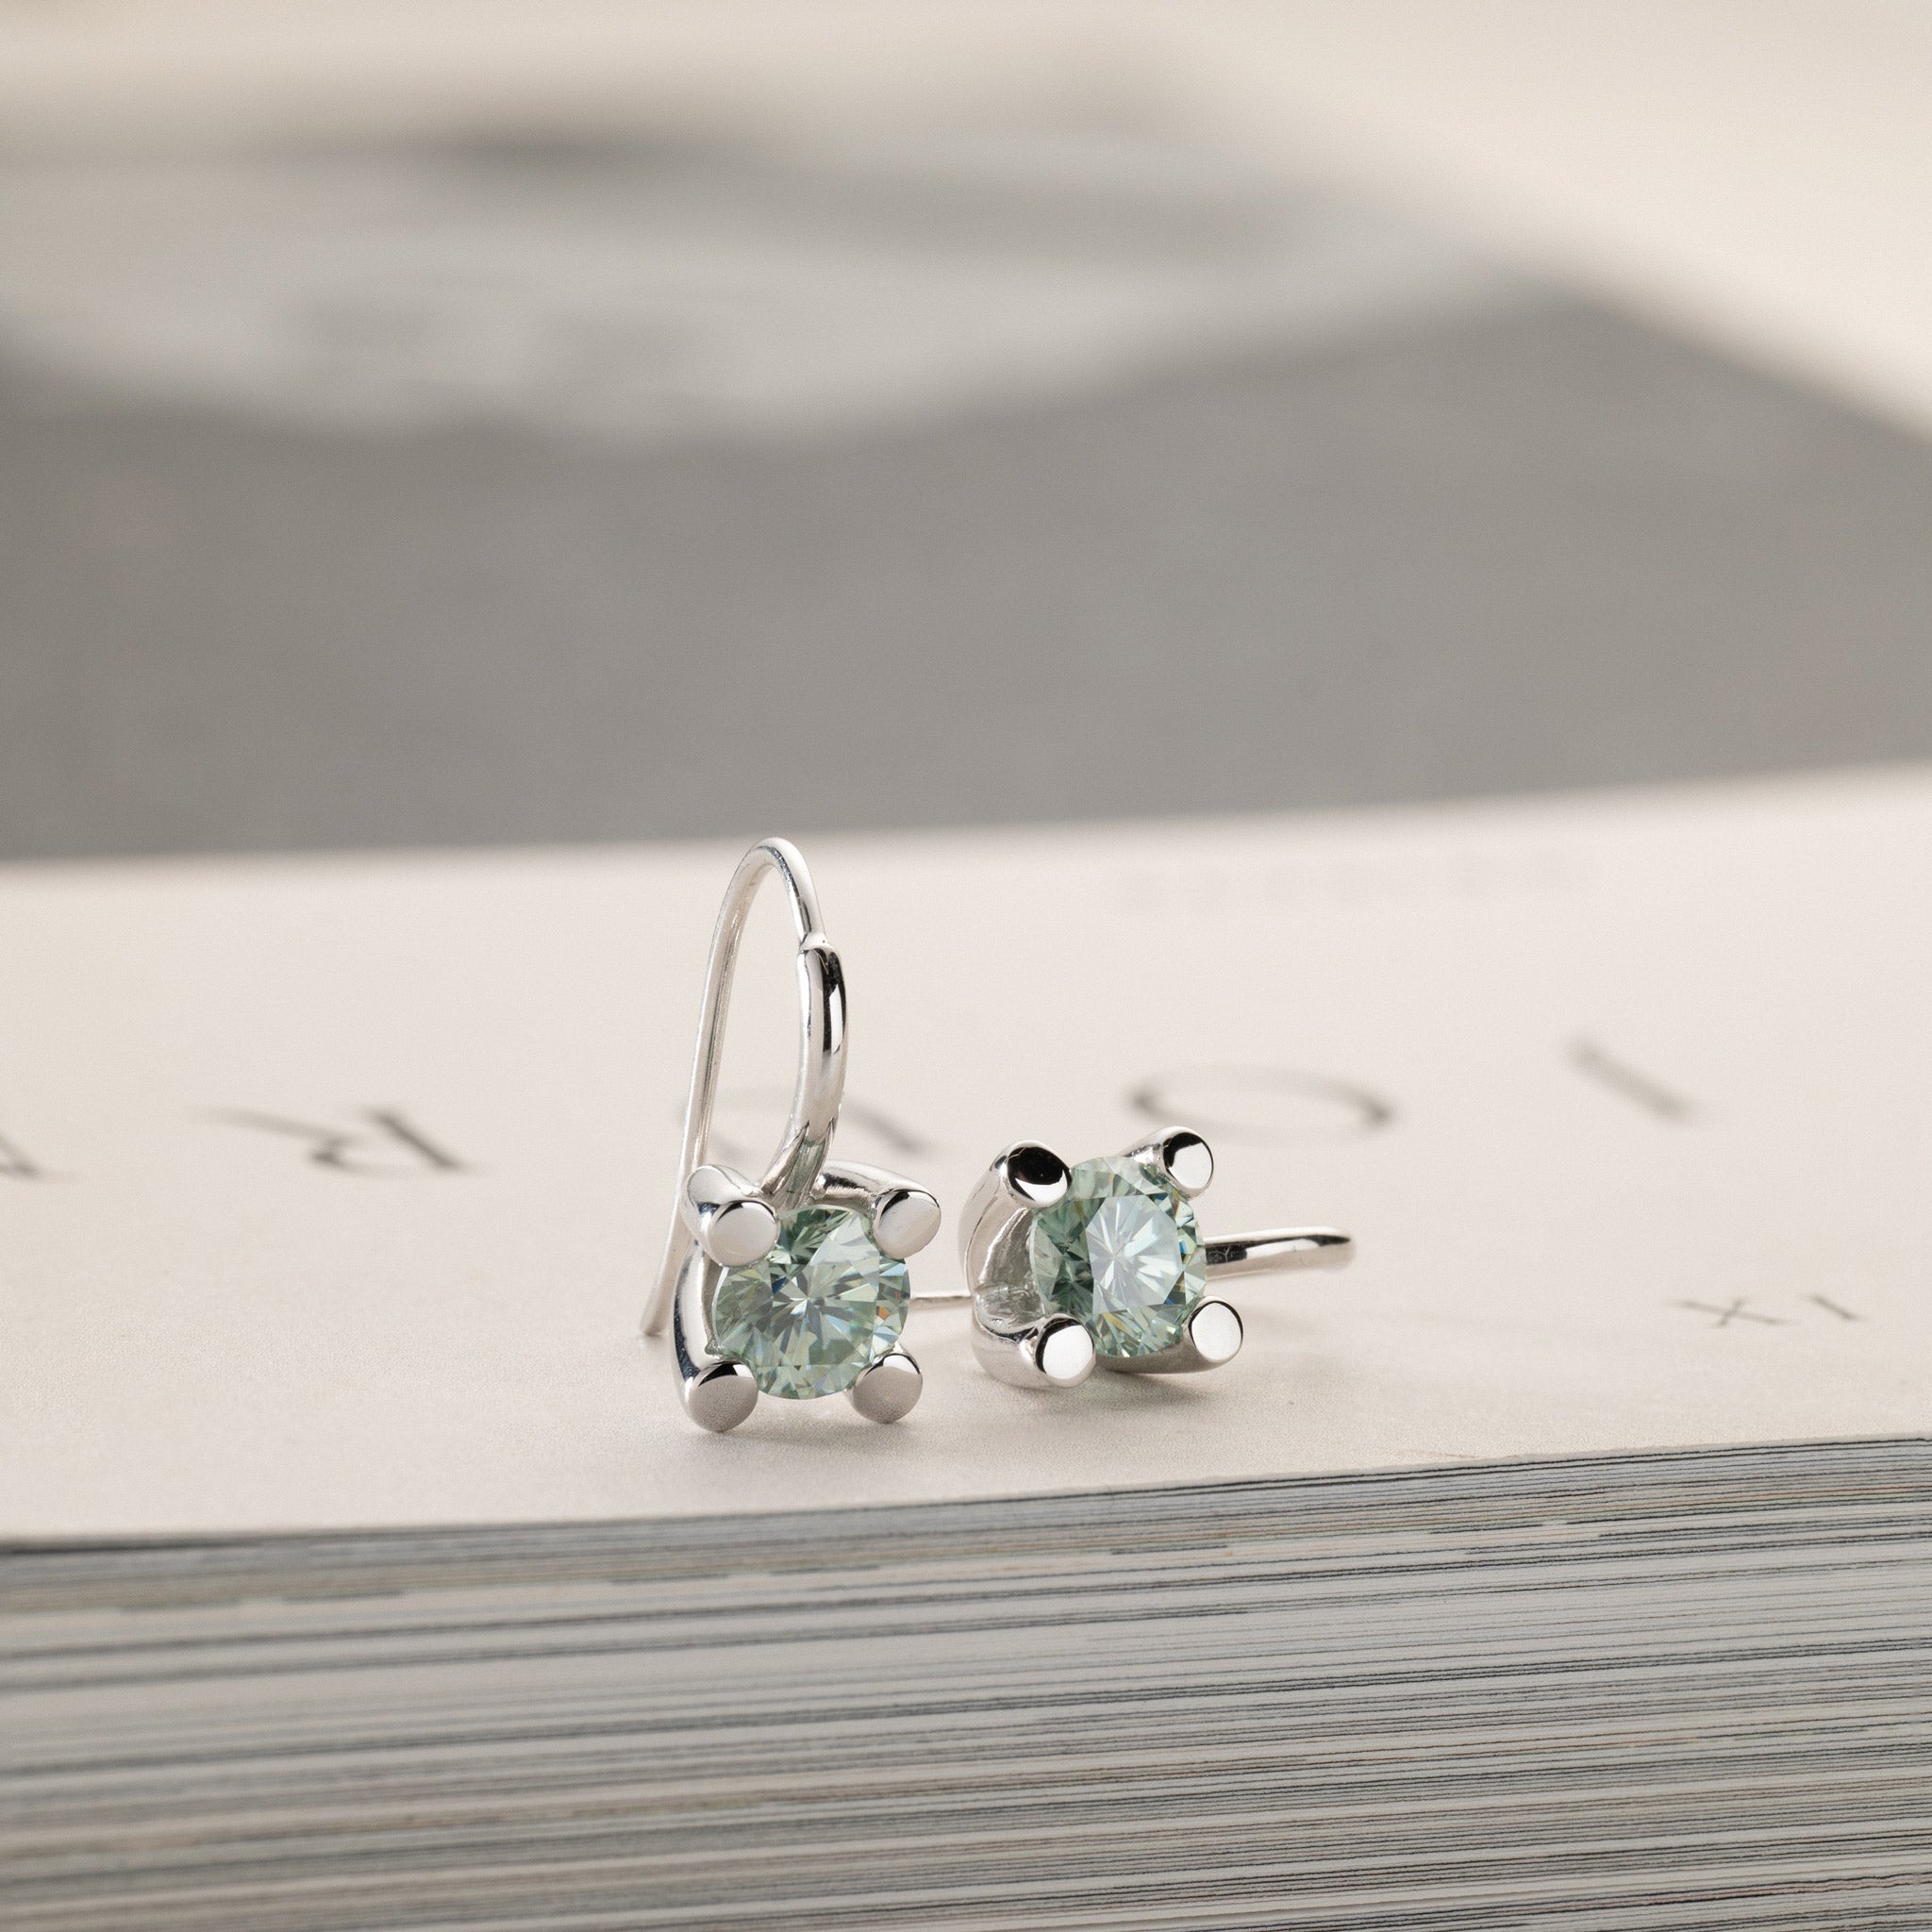 2x0.75ct green moissanite solitaire earrings silver Miriam